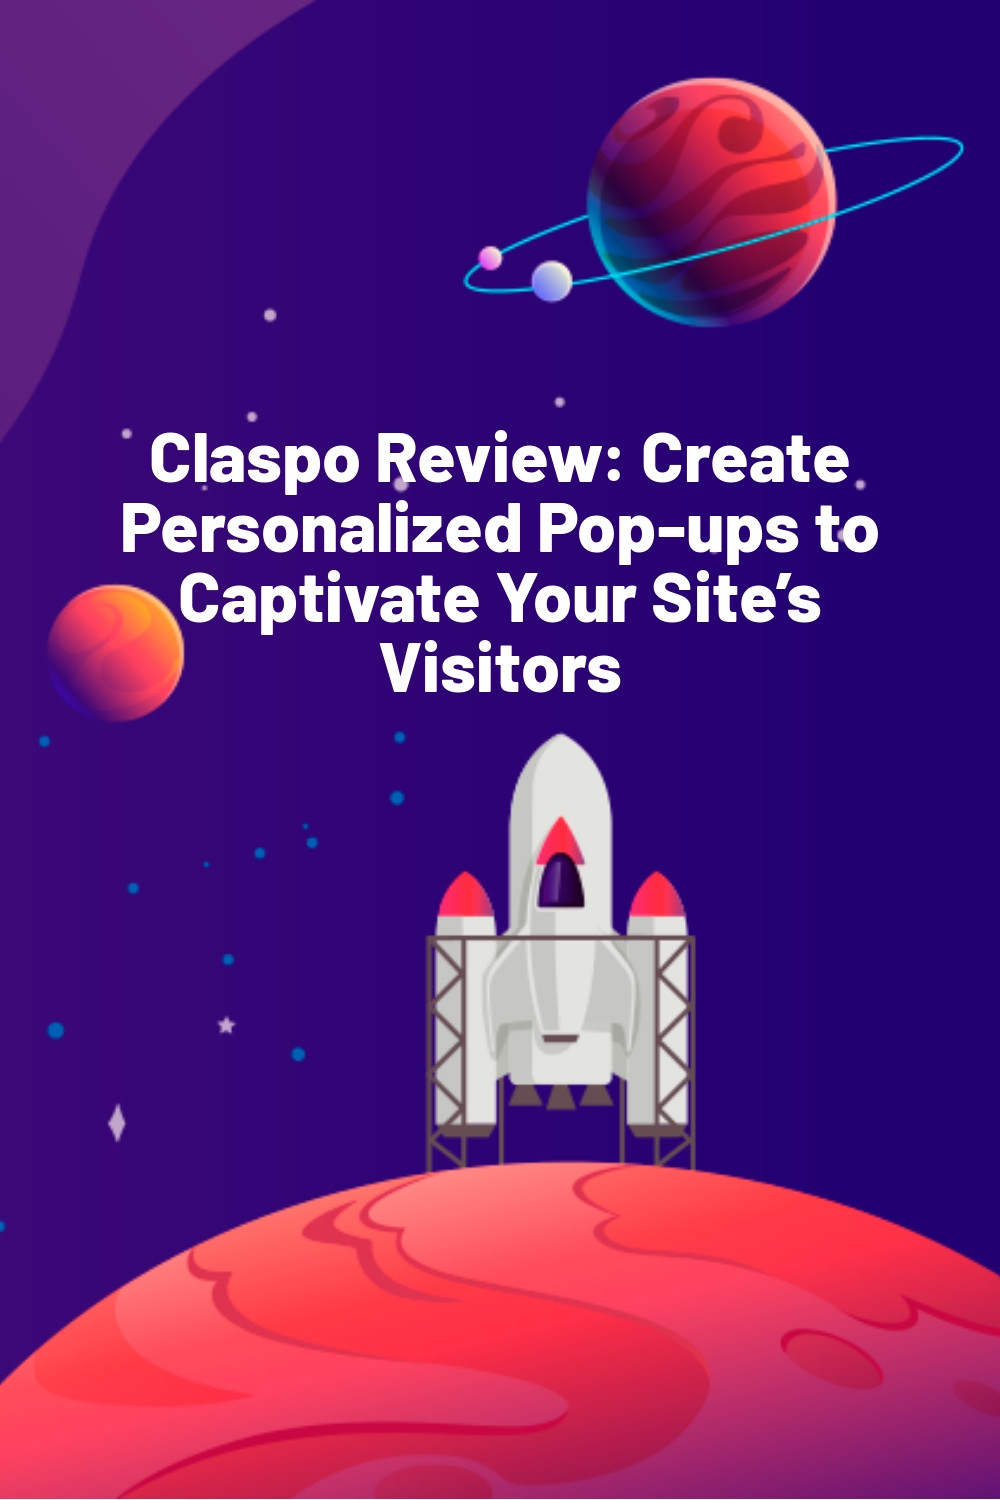 Claspo Review: Create Personalized Pop-ups to Captivate Your Site’s Visitors